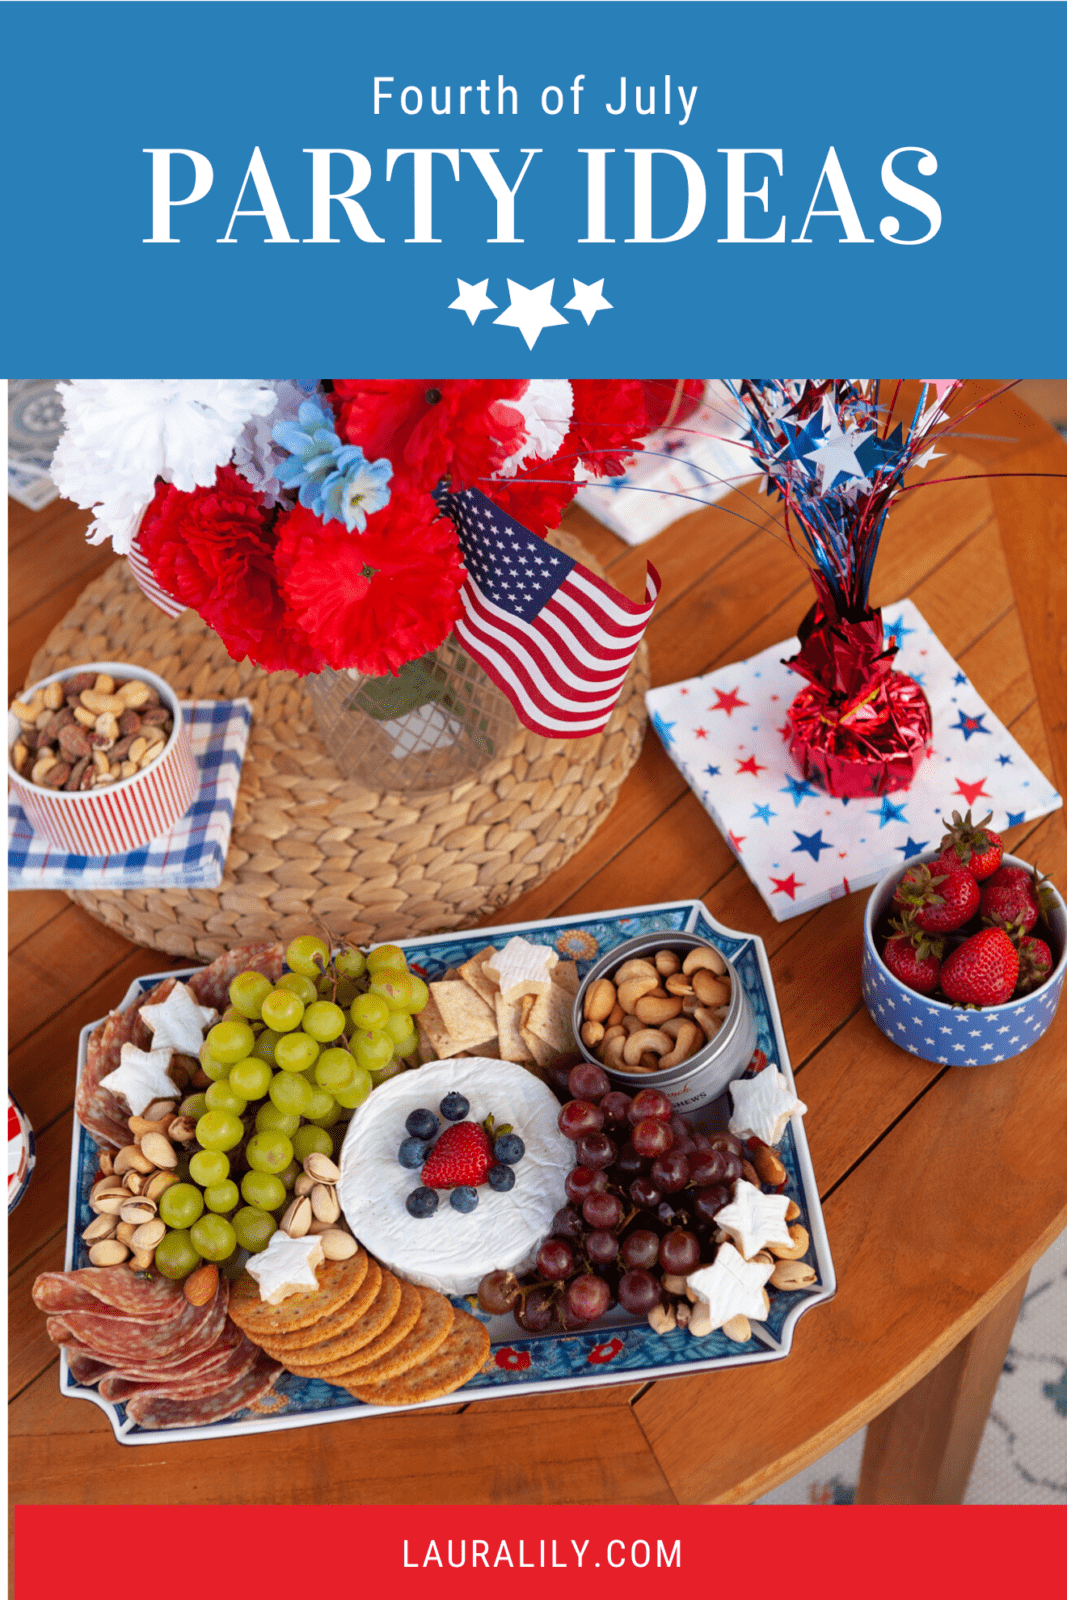 Fourth of July Home Decor + Party Ideas by Los Angeles Home Decor Blogger Laura Lily,